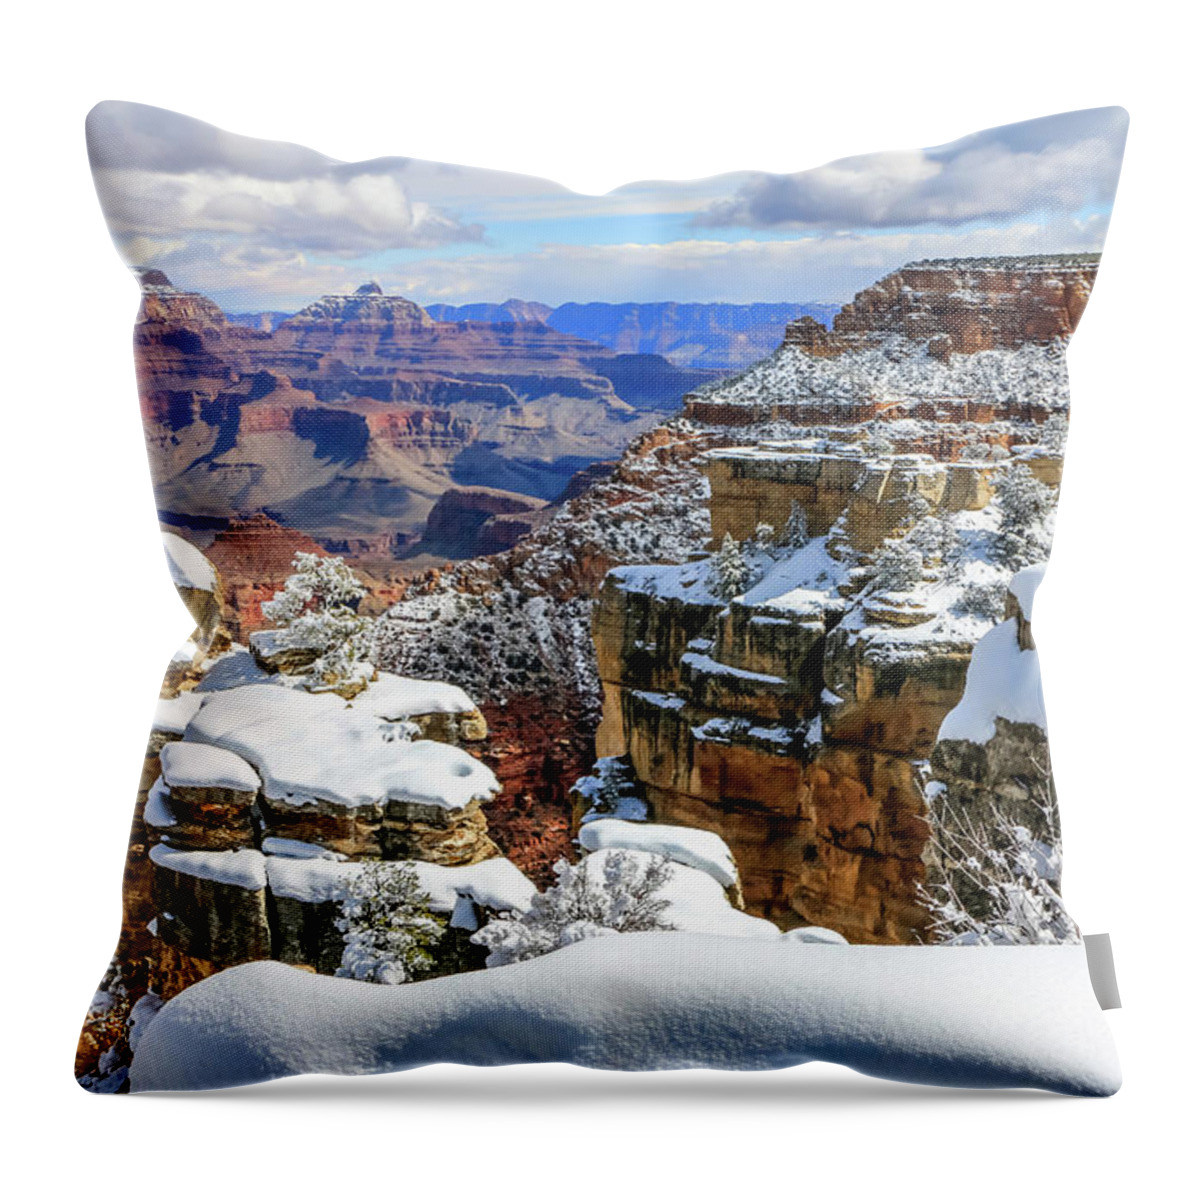 Arizona Throw Pillow featuring the photograph Grand Canyon Snow 1 by Dawn Richards